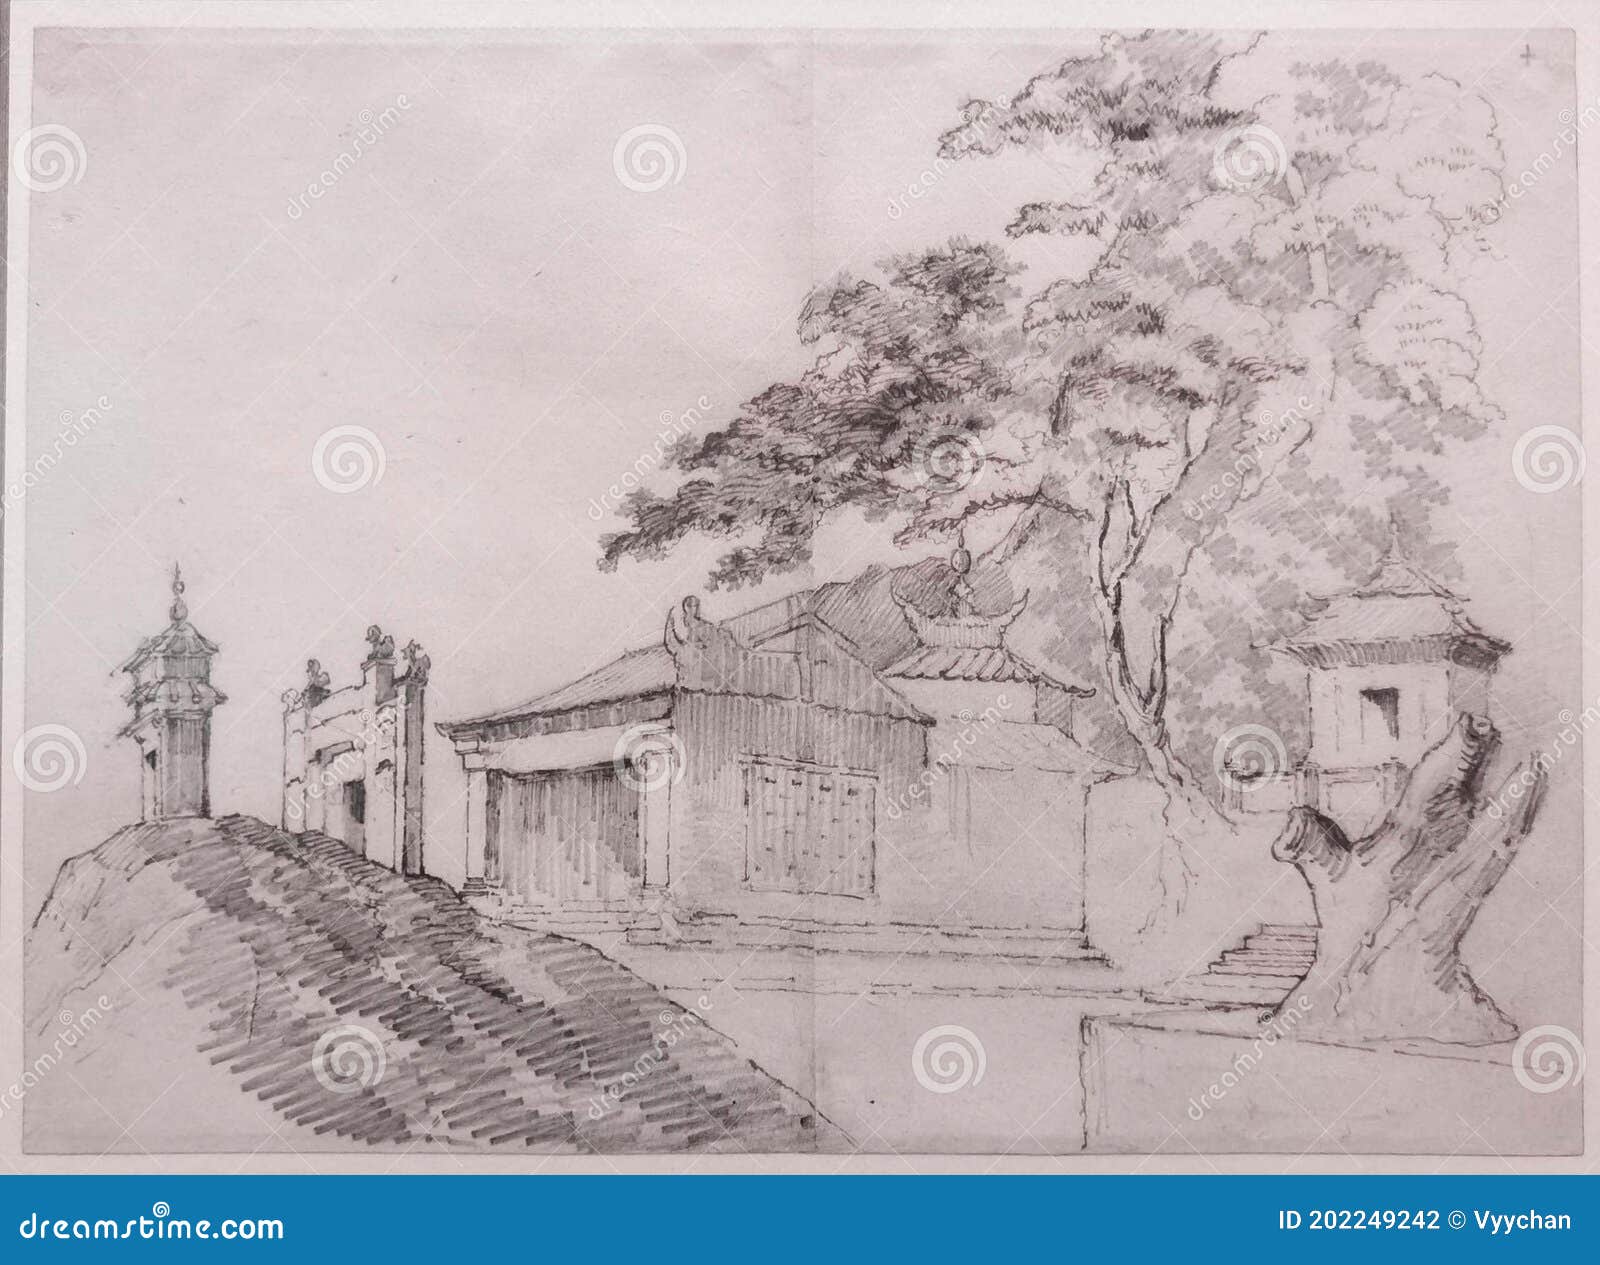 Pencil Sketch Of A Scenery - Desi Painters